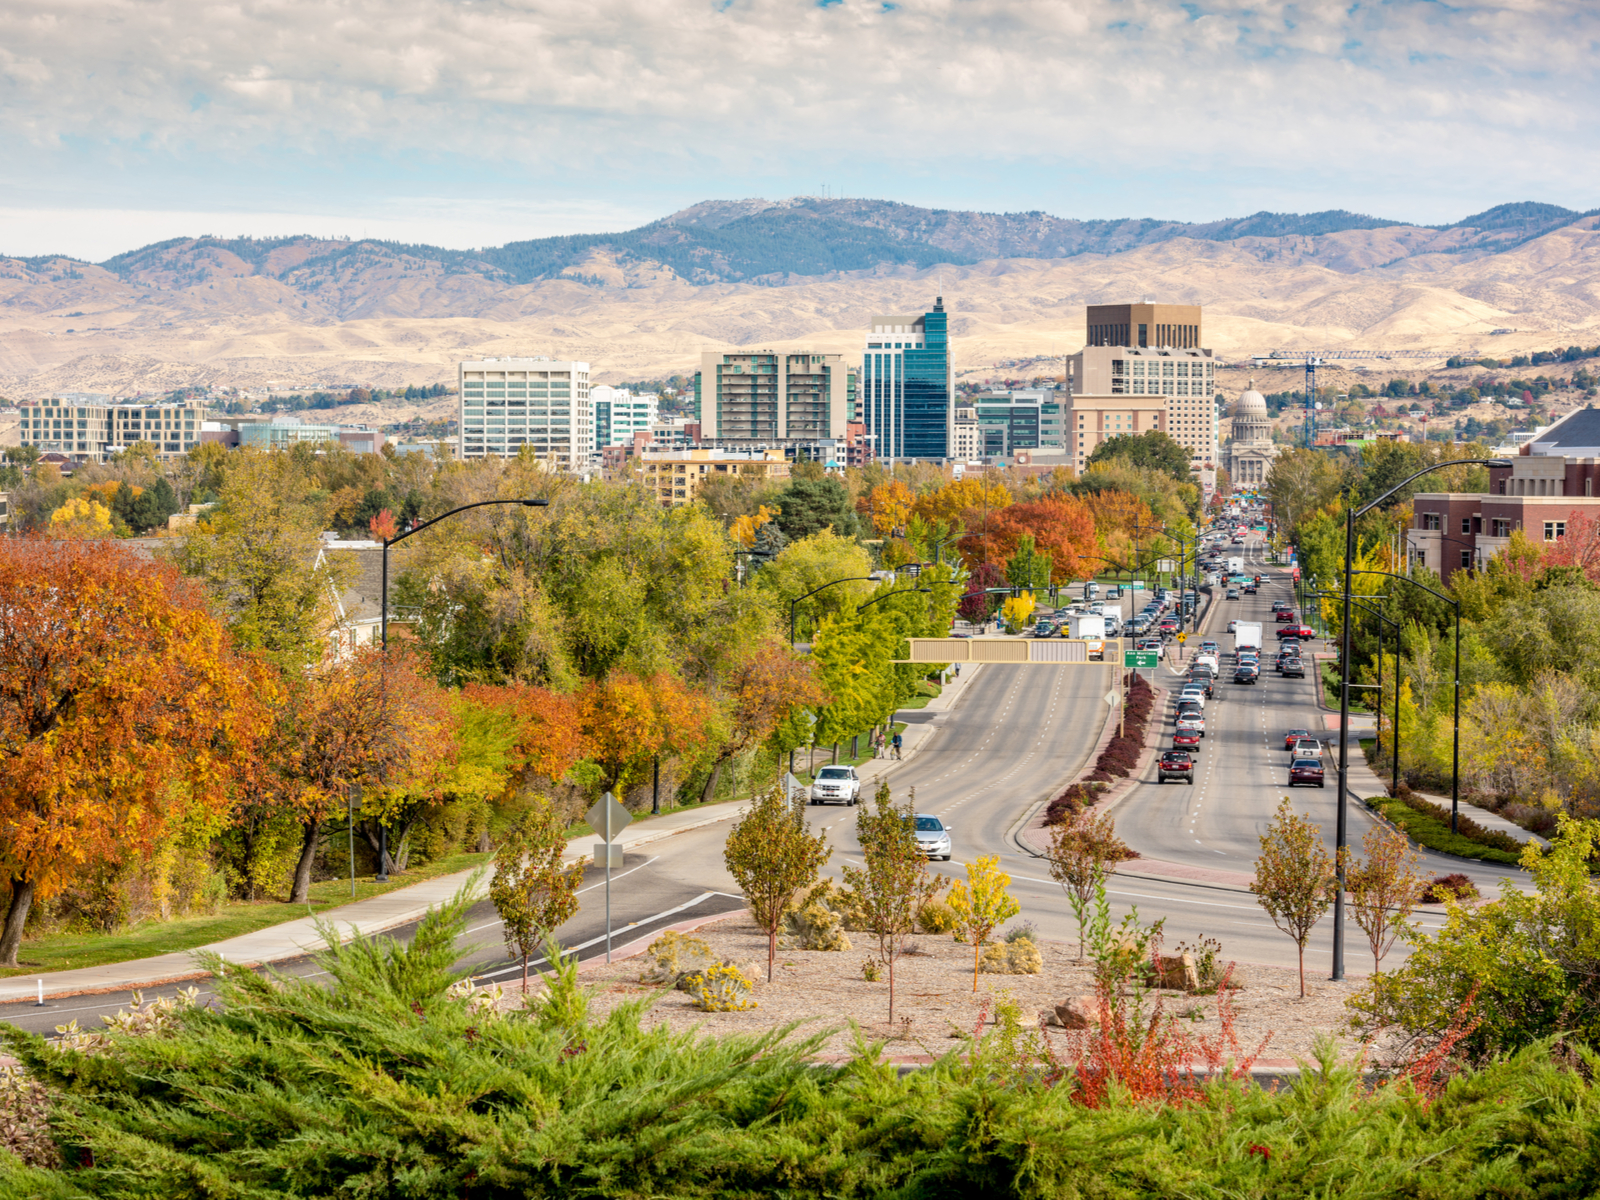 Gorgeous street view of Boise for a piece on the best things to see in Idaho